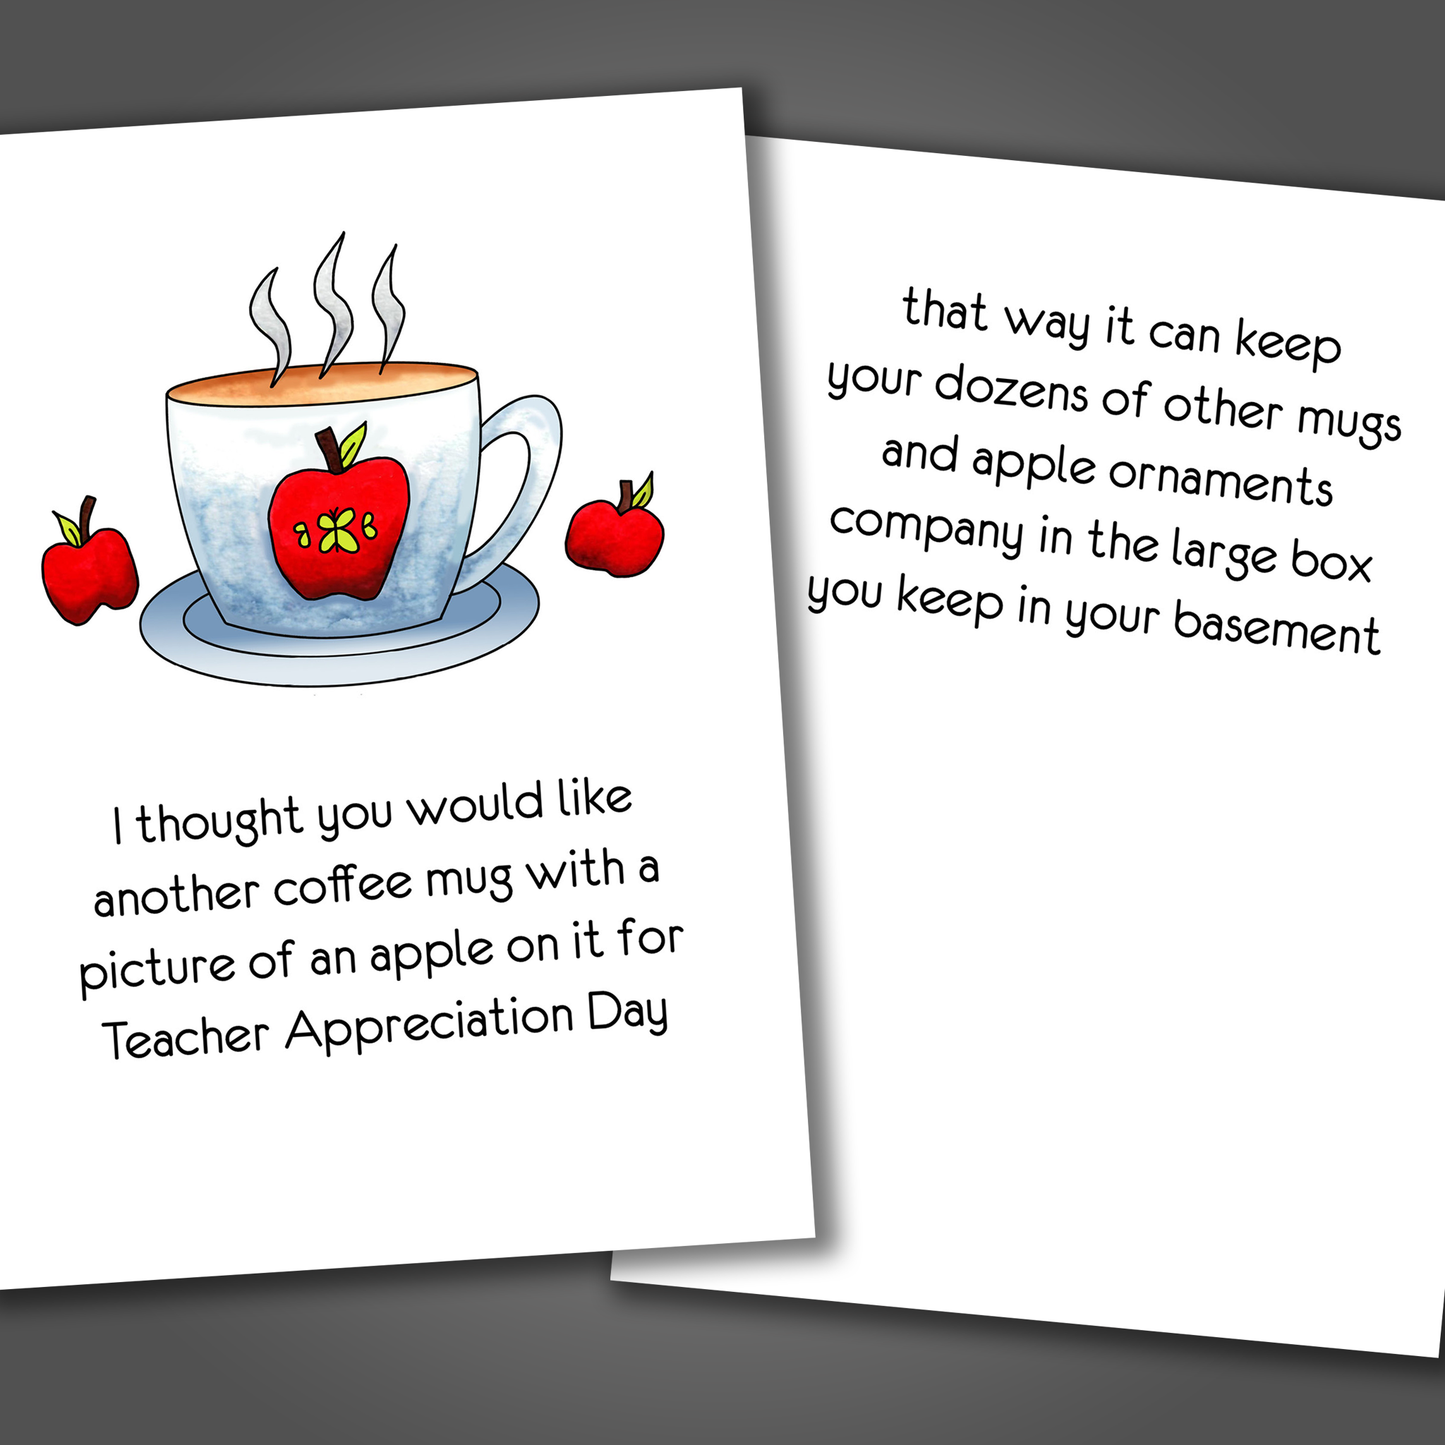 Funny teacher appreciate card with a coffee mug and apples drawn on the front of the card. Inside the card is a funny joke that makes the teacher laugh.